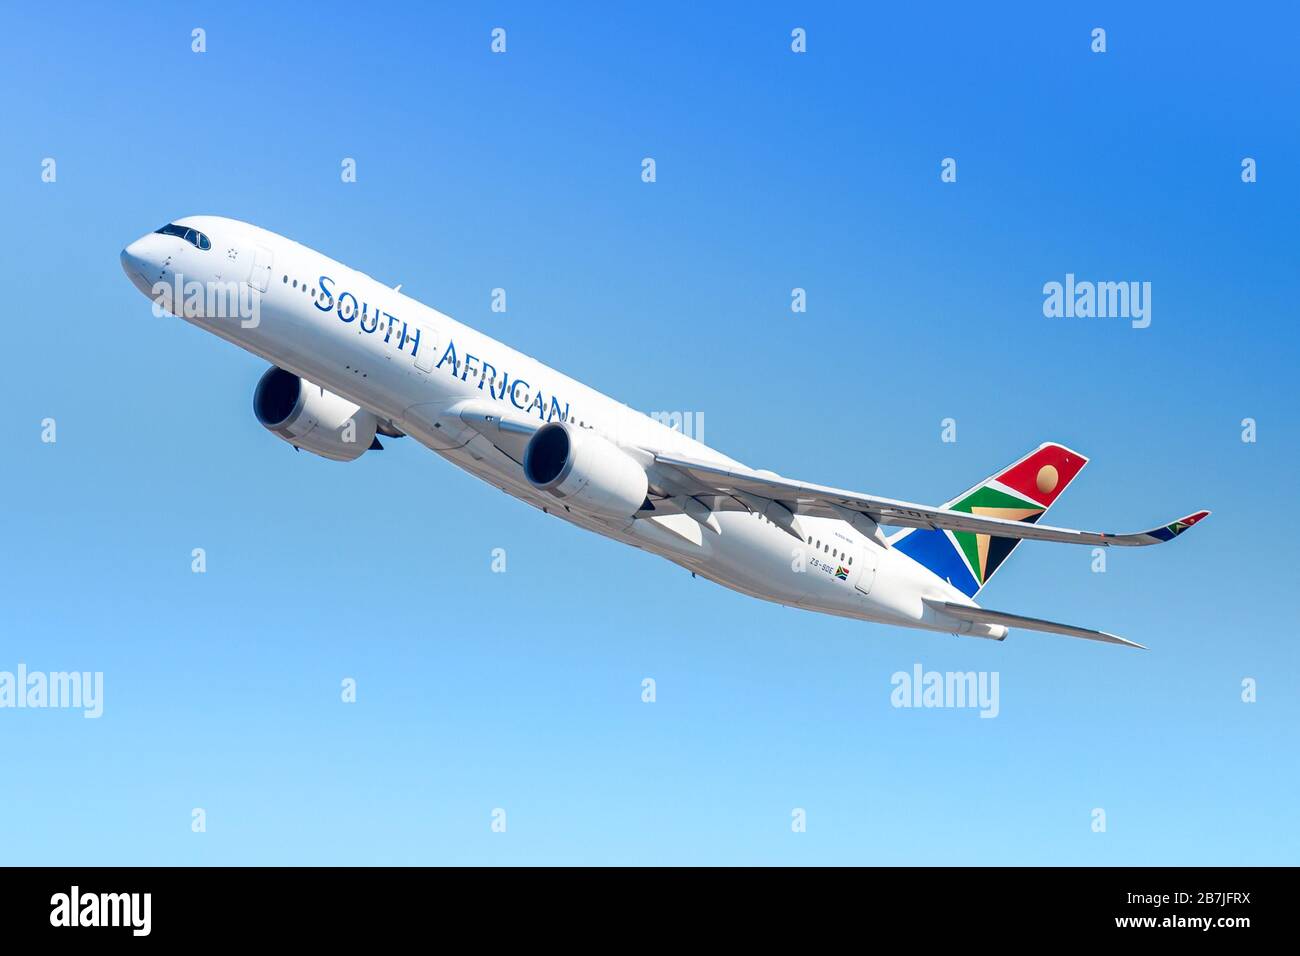 New York, USA - March 1, 2020: South African Airways Airbus A350-900 airplane at New York John F. Kennedy airport (JFK) in the USA. Airbus is an aircr Stock Photo